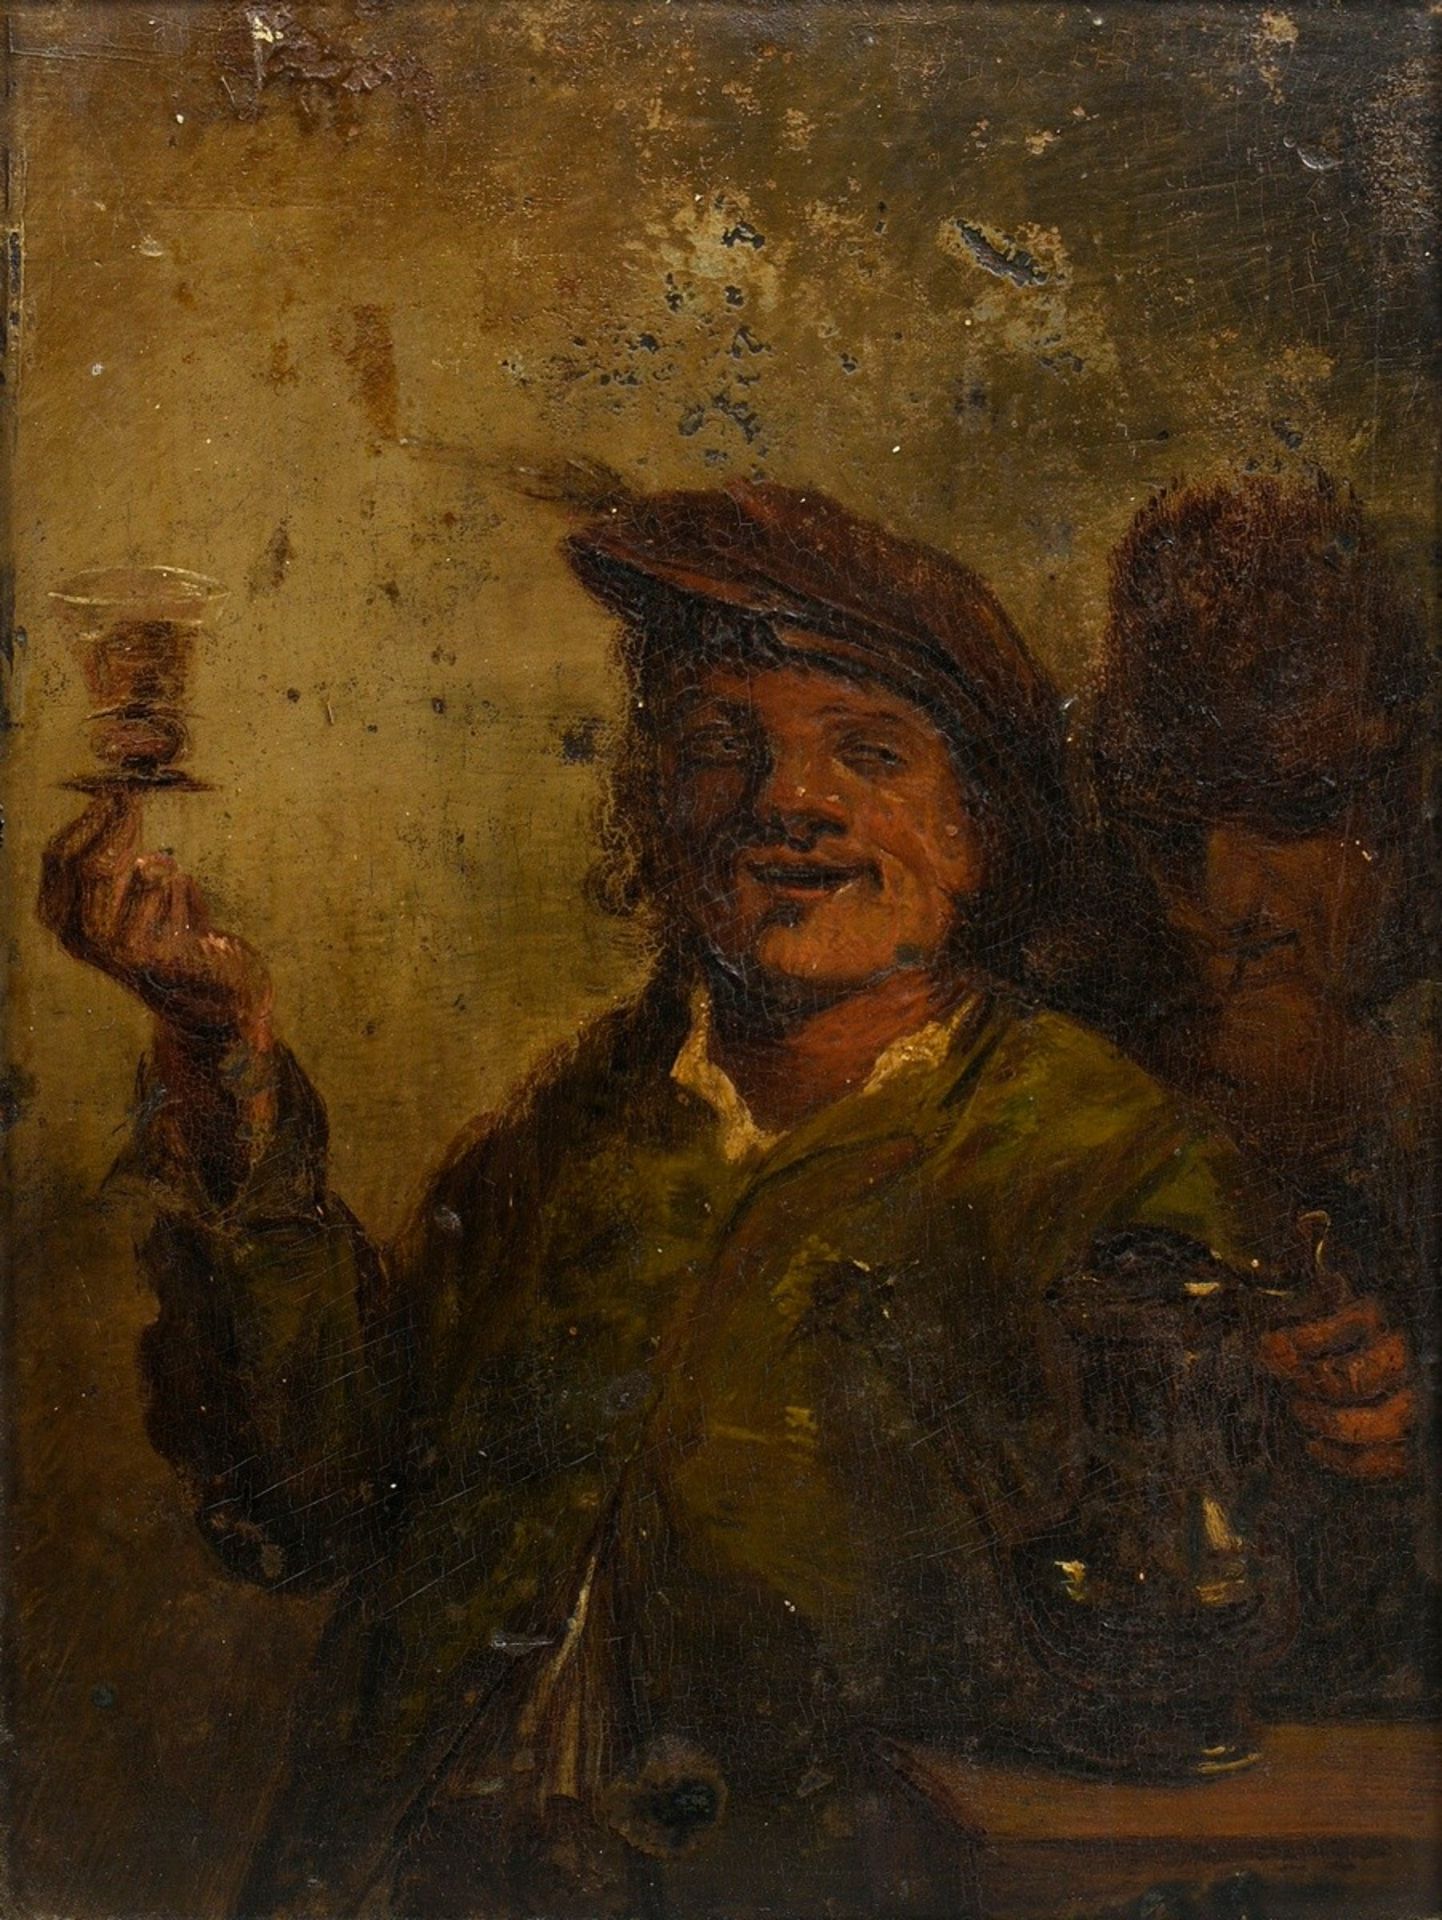 Unknown artist of the 17th/18th c. "Wine Drinker", in the style of Frans Hals (1585-1666), oil/wood